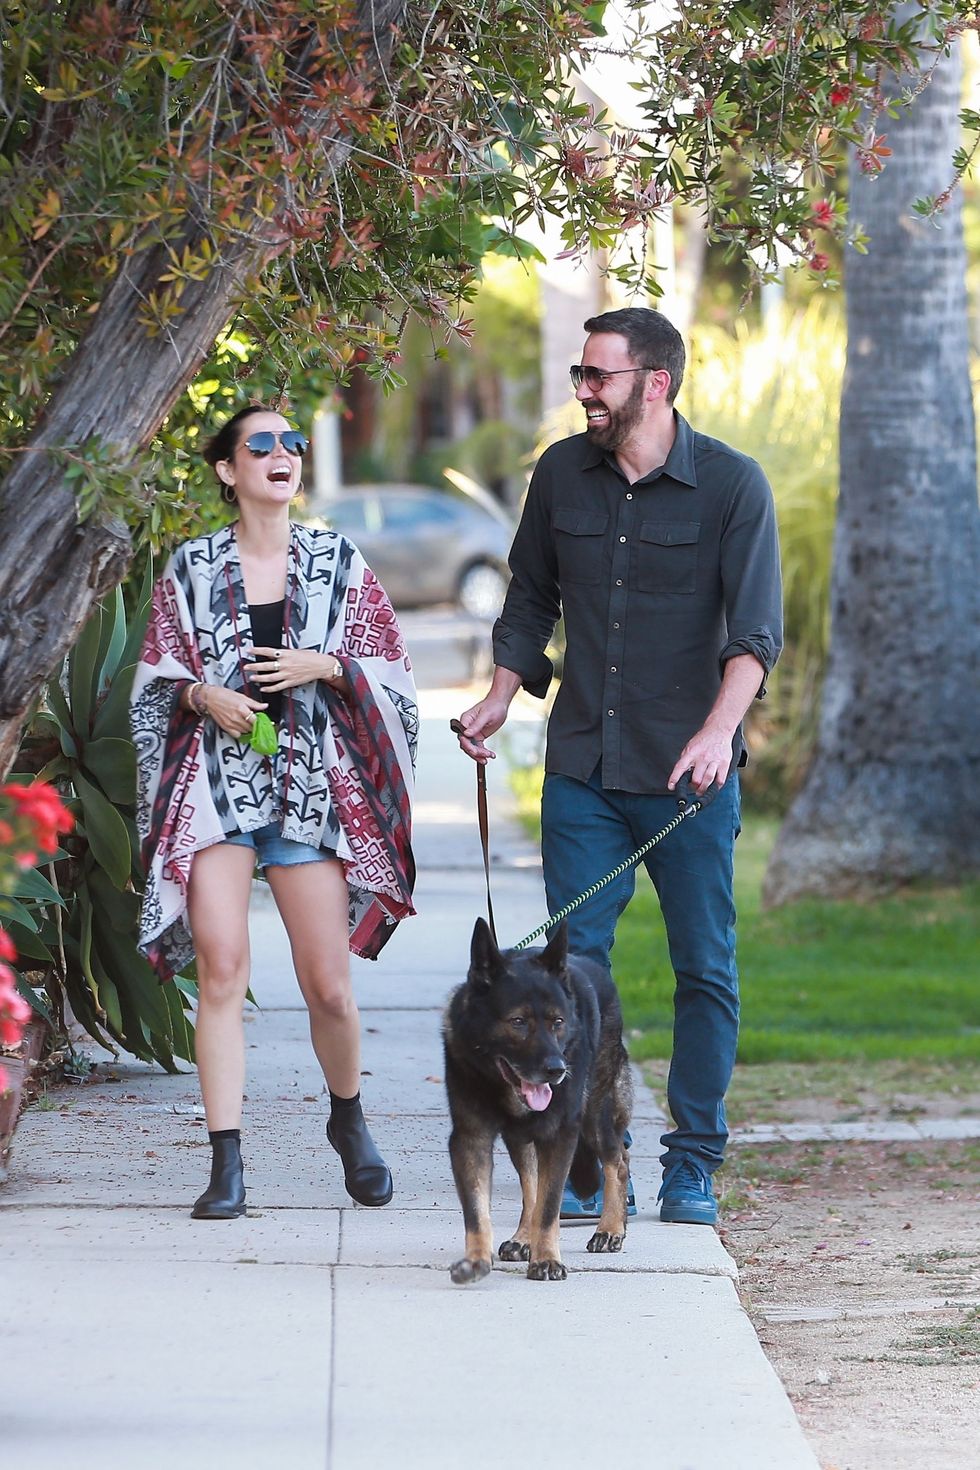 santa monica, ca    ben affleck and girlfriend ana de armas seen taking out their dogs for a walk in their neighborhood  ben and ana seemed to be laughing over something during their walkpictured ben affleck, ana de armasbackgrid usa 29 june 2020 usa 1 310 798 9111  usasalesbackgridcomuk 44 208 344 2007  uksalesbackgridcomuk clients   pictures containing childrenplease pixelate face prior to publication